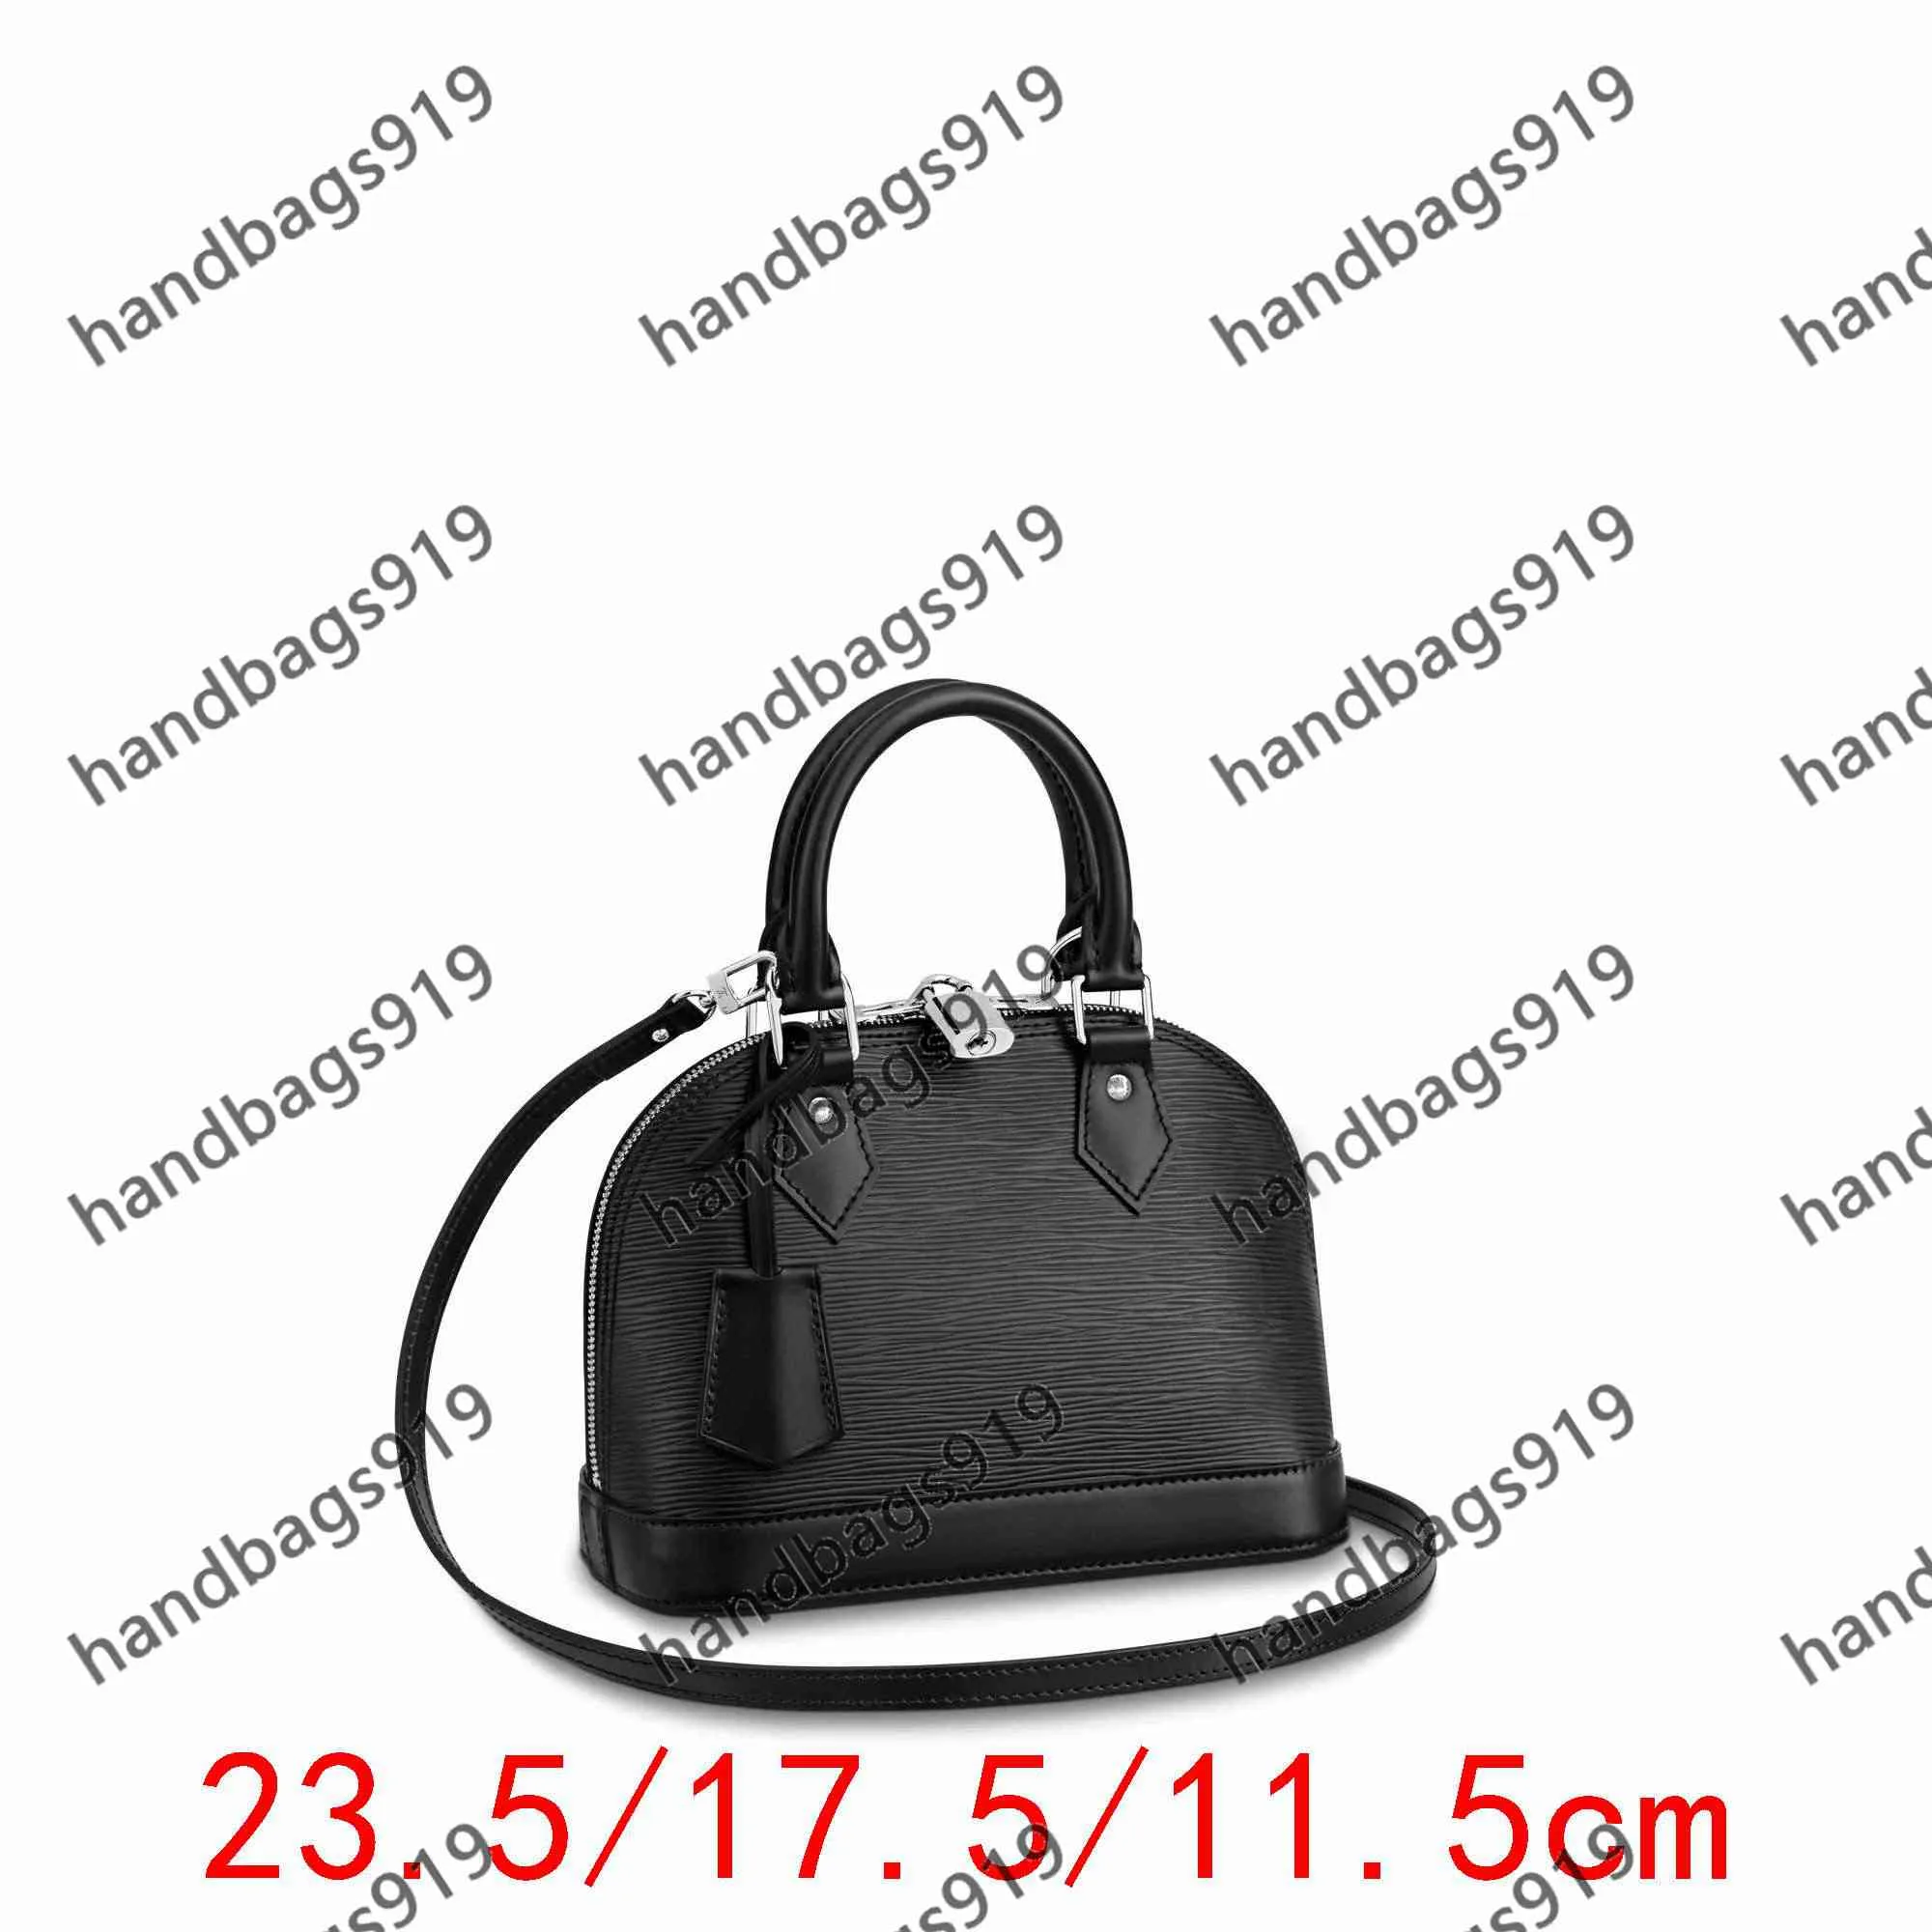 Shoulder Bag latest Fashion bags ShoulderBag classic Style womens multiple colour Shellbag With key lock women crossbody 23.5cm and 32cm generous